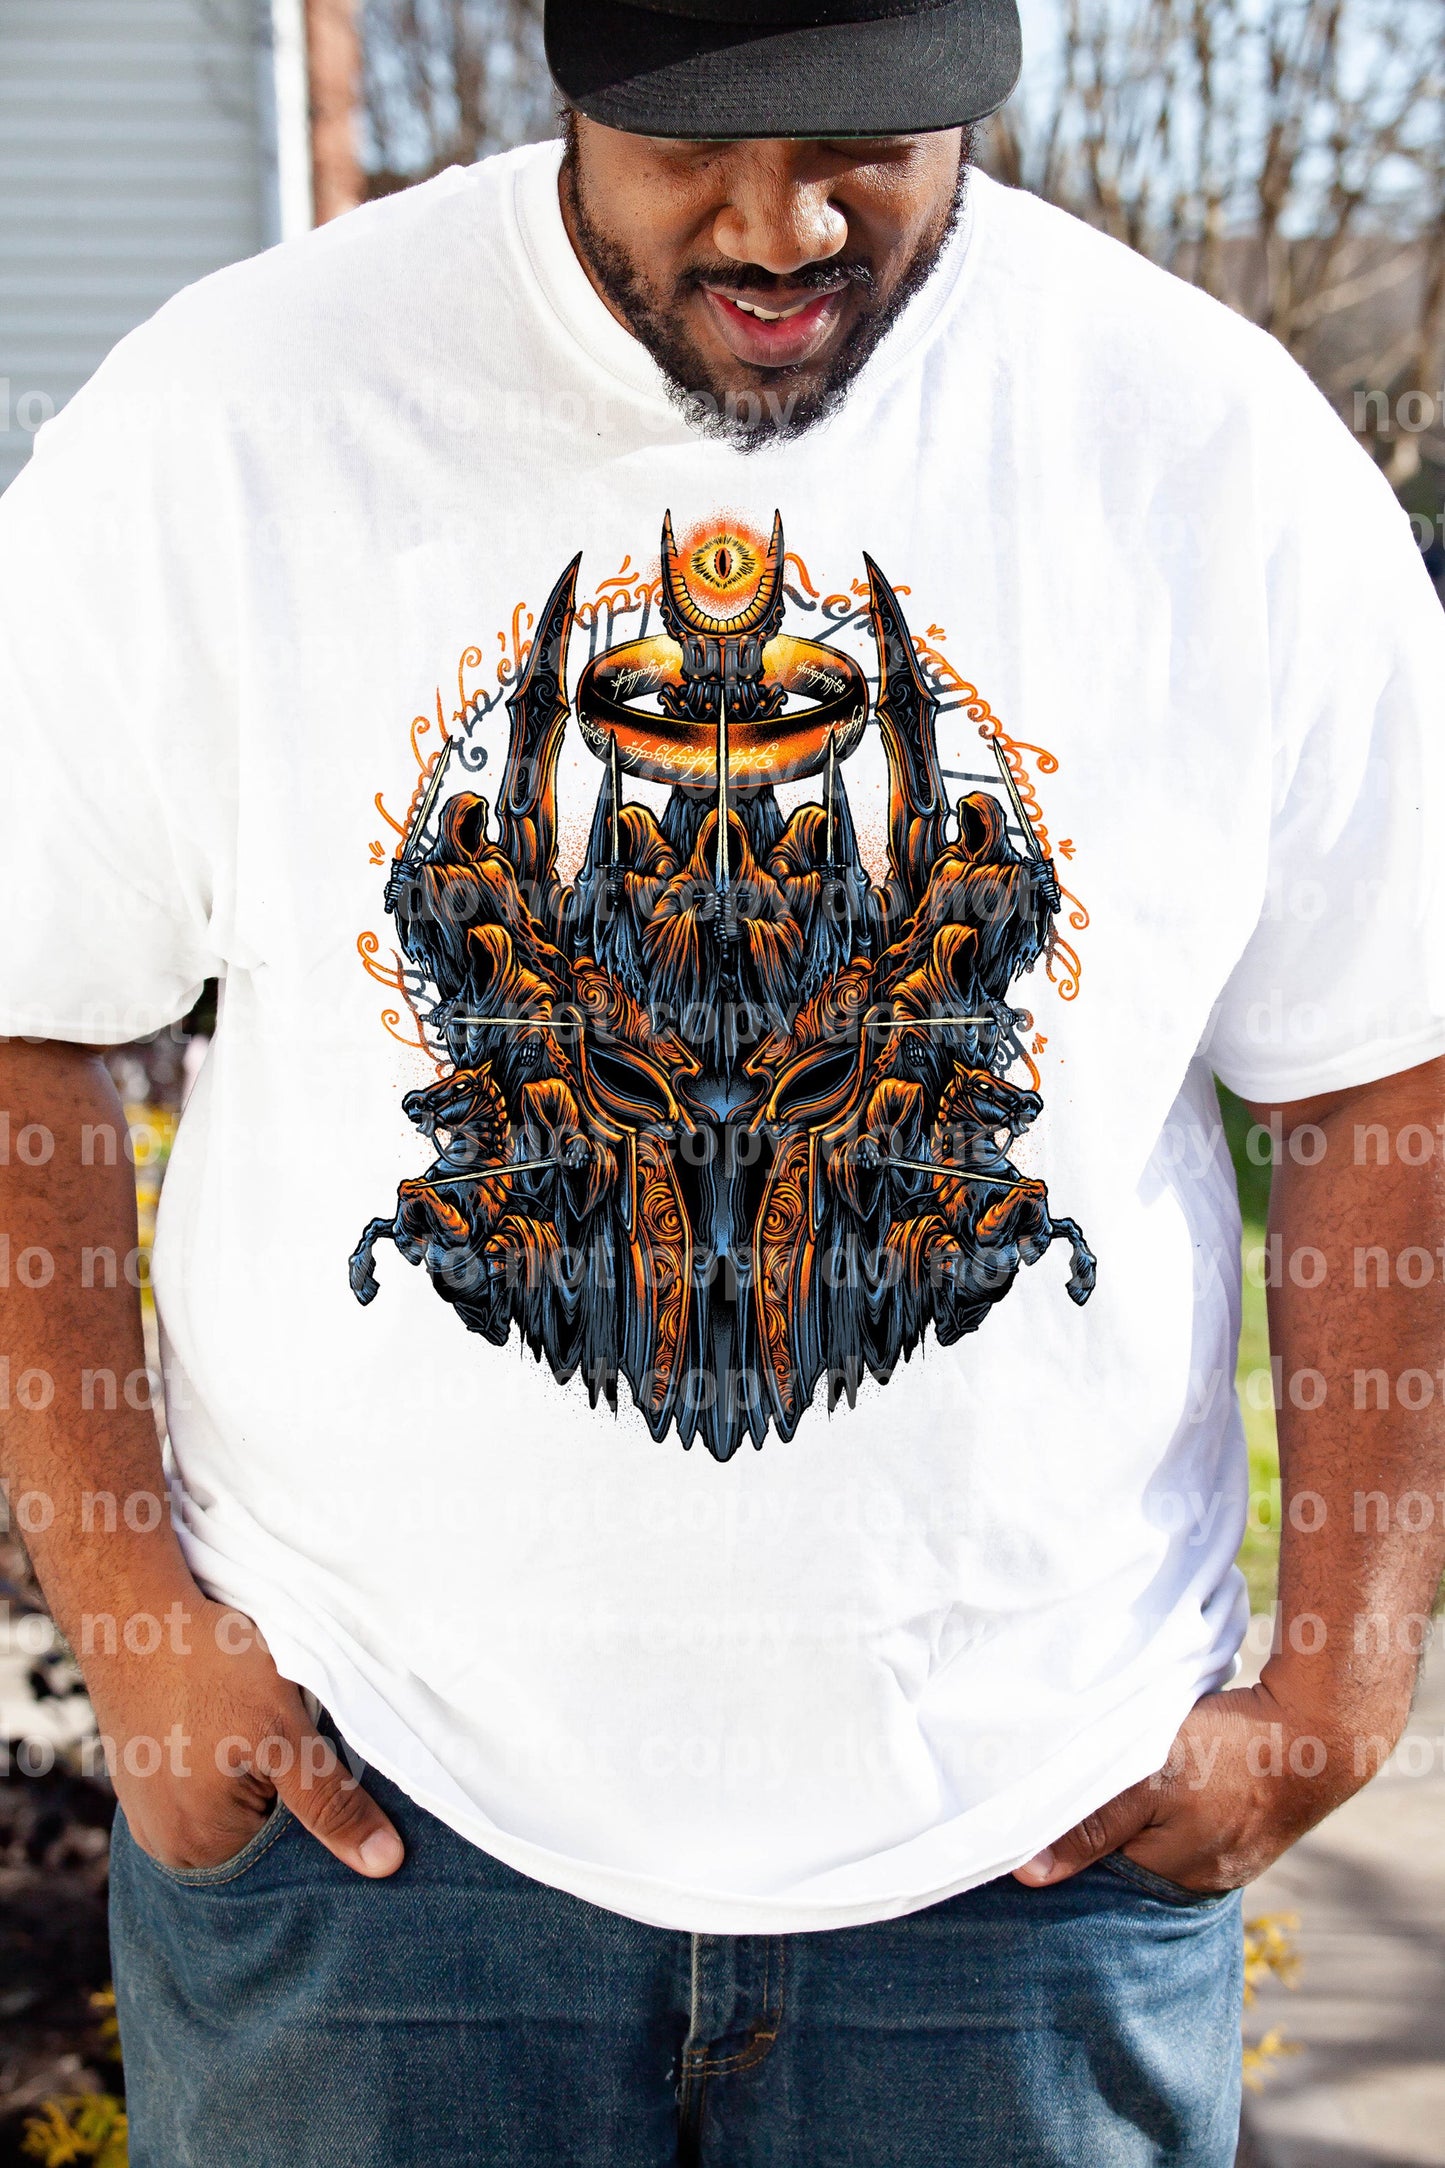 Dark Lord Villain Dream Print or Sublimation Print with Decal Option